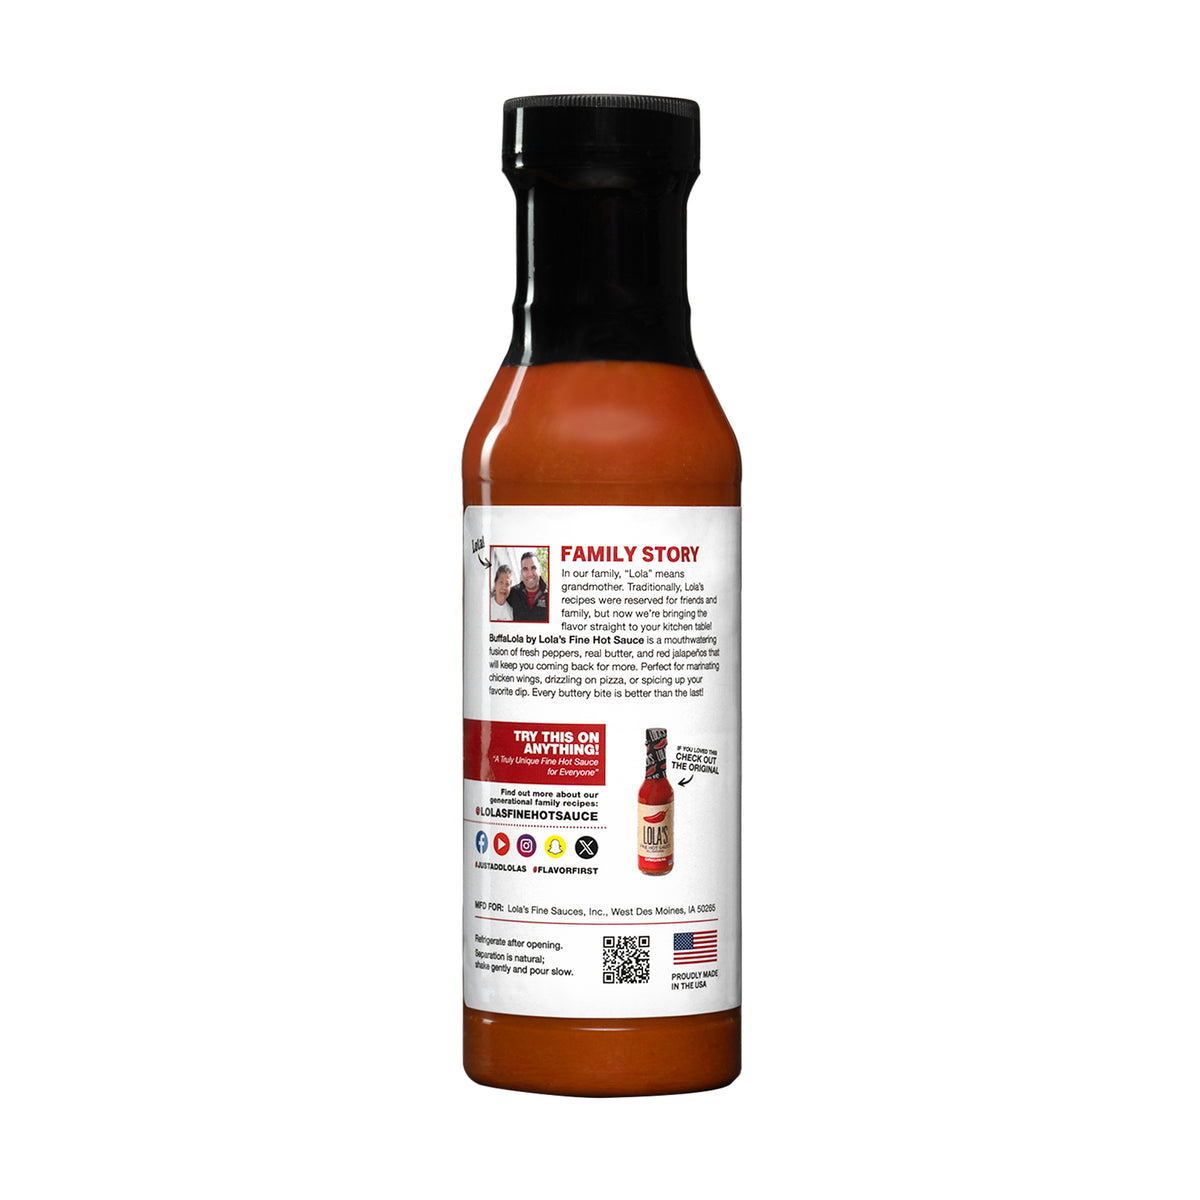 Lola's Buffa-Lola Wing Sauce: A bottle of hot sauce with a buttery fusion of peppers and red jalapeños. Perfect for wings, pizza, and dips. 12 oz. plastic bottle.